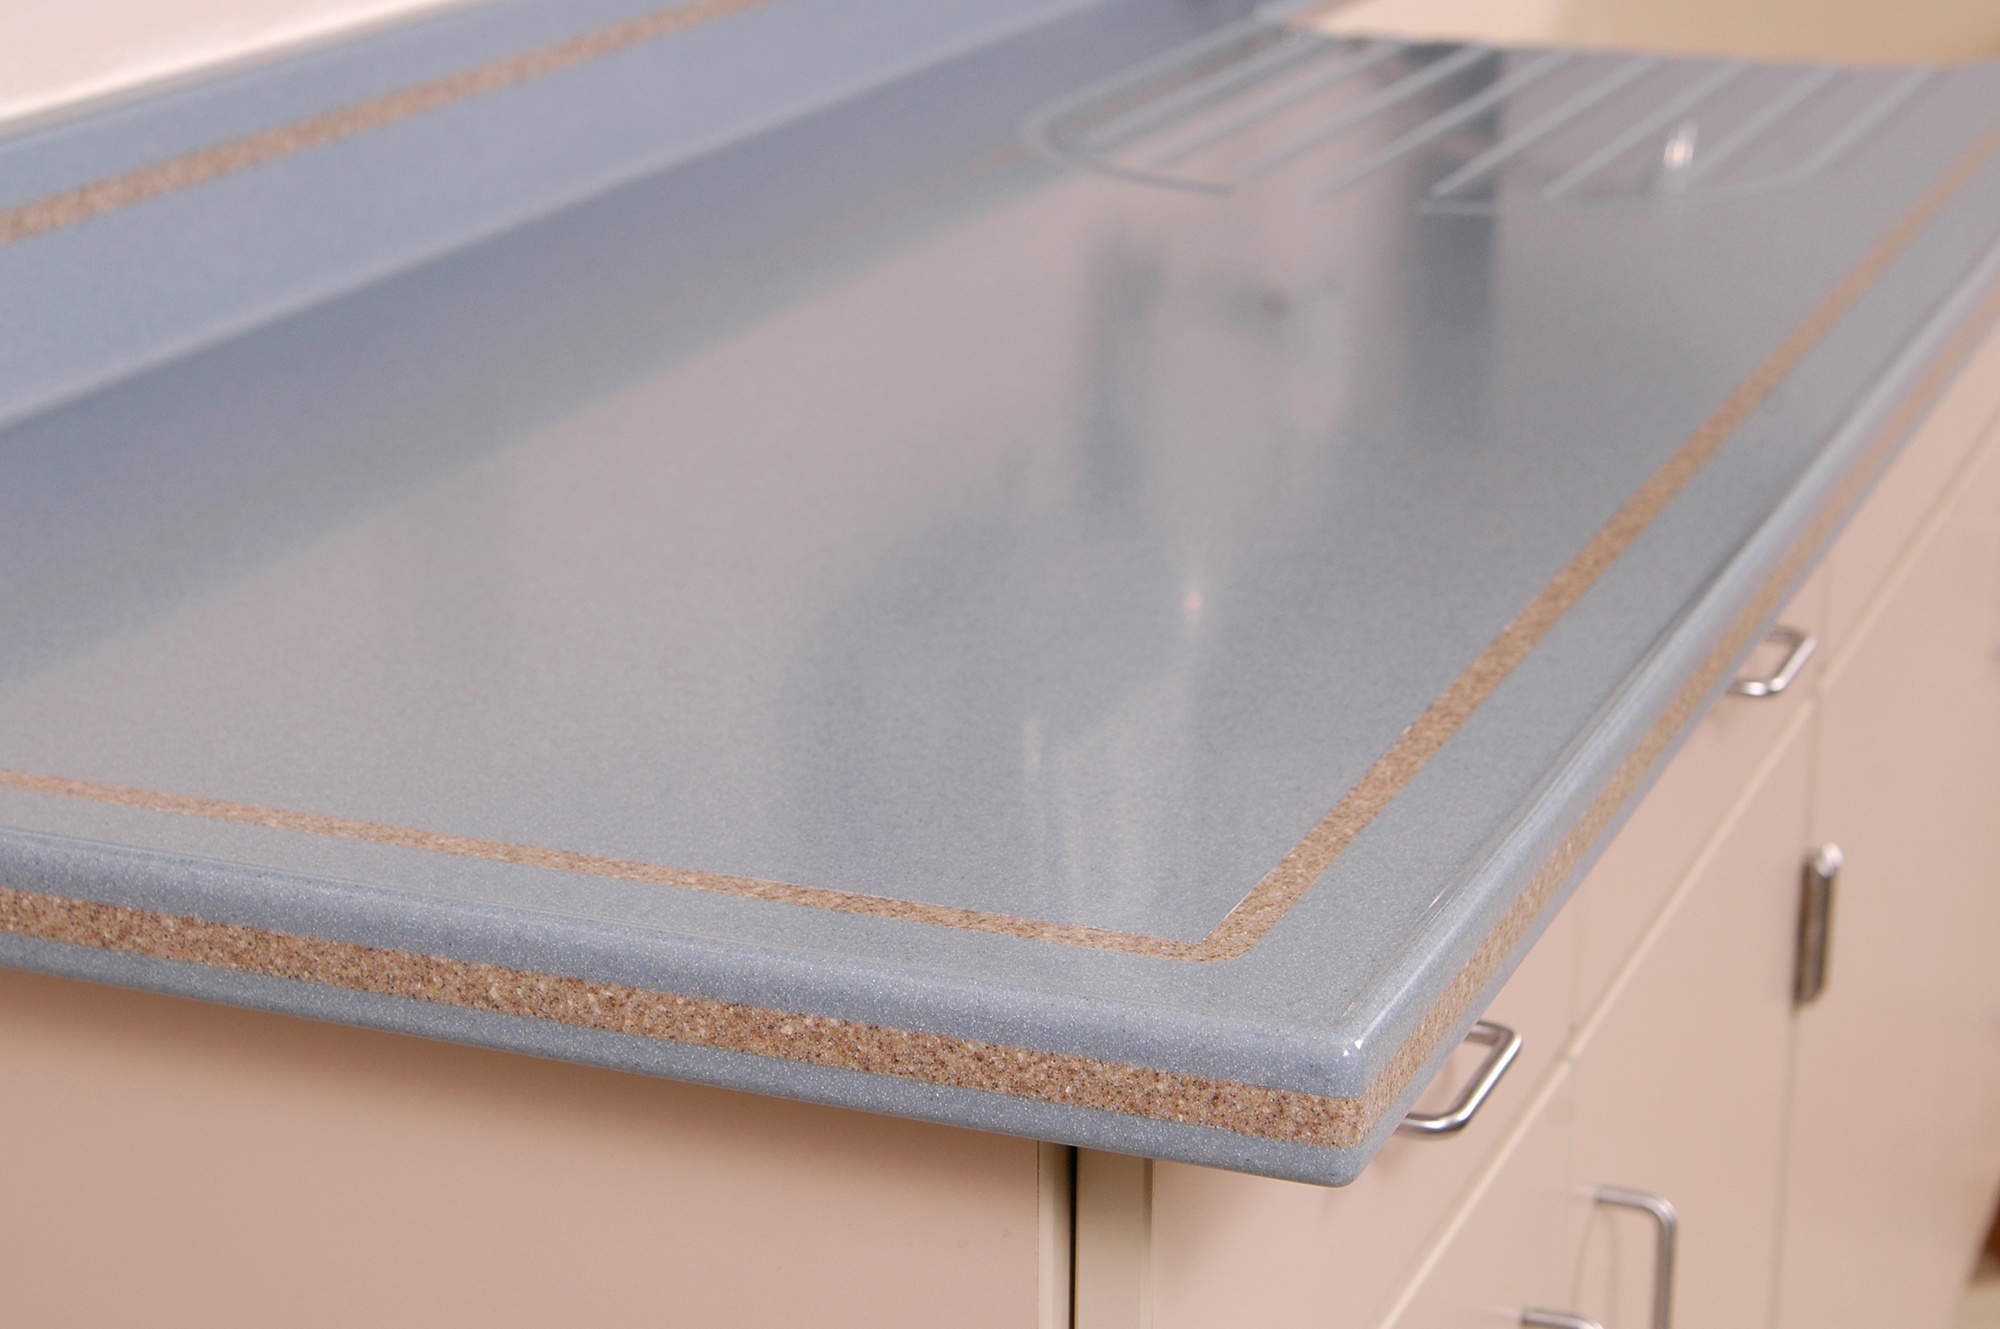 Cheap Countertops: The Good, The Bad, The Seriously Ugly